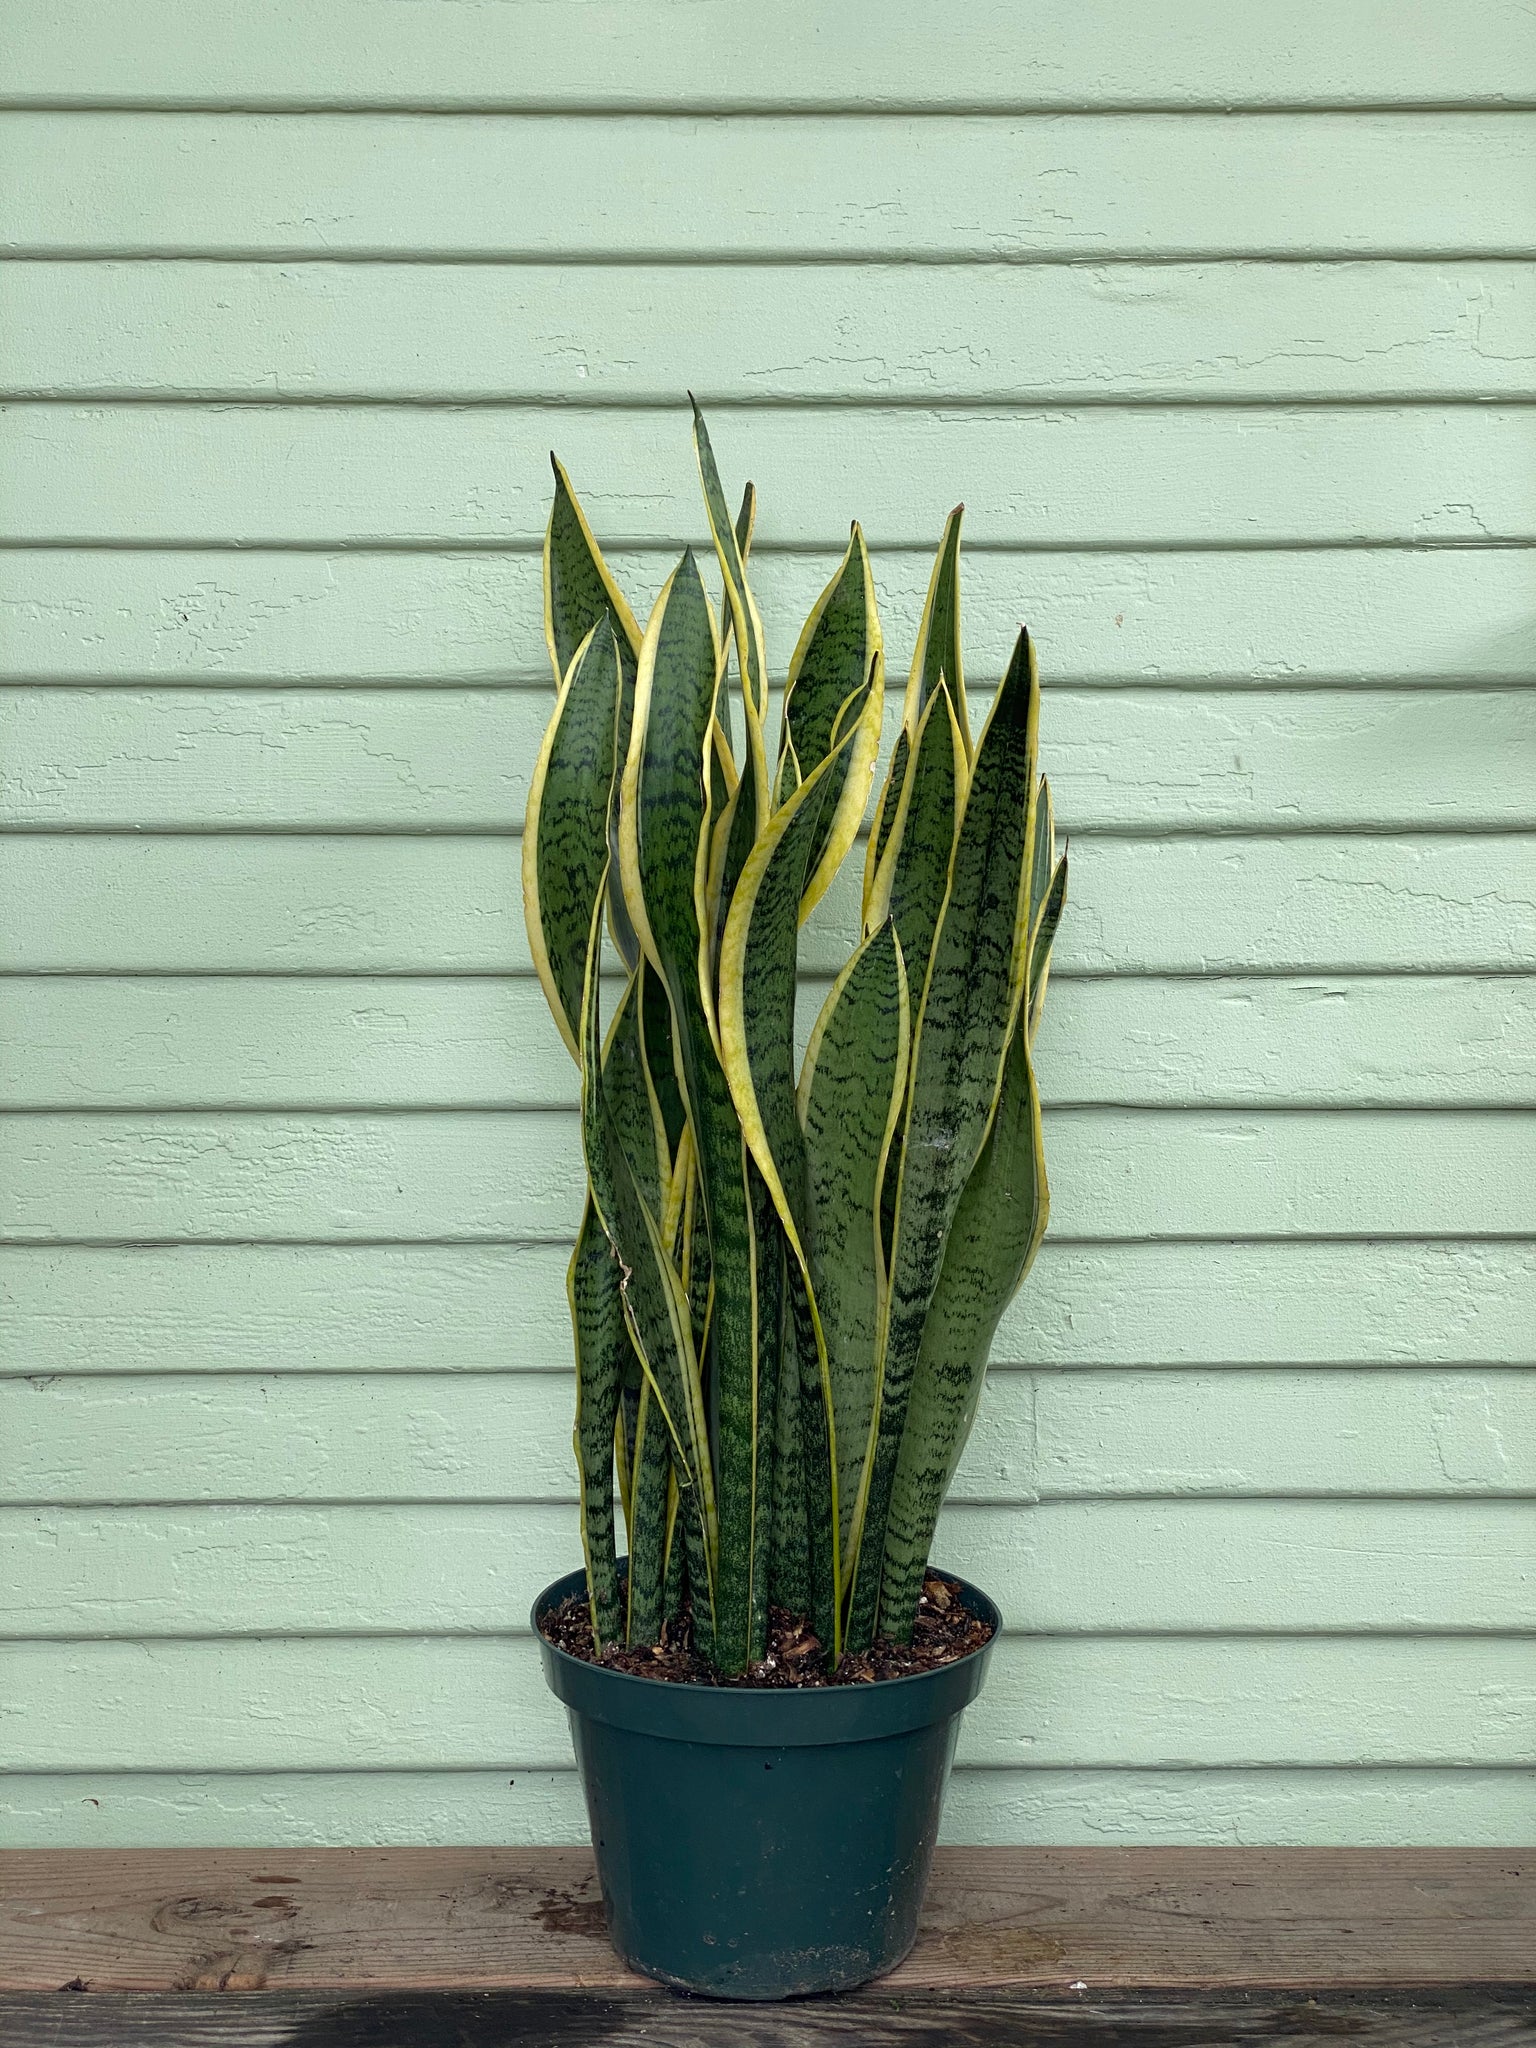 Daylily Nursery Snake Plant, Mother In Laws Tongue Plants in a 4